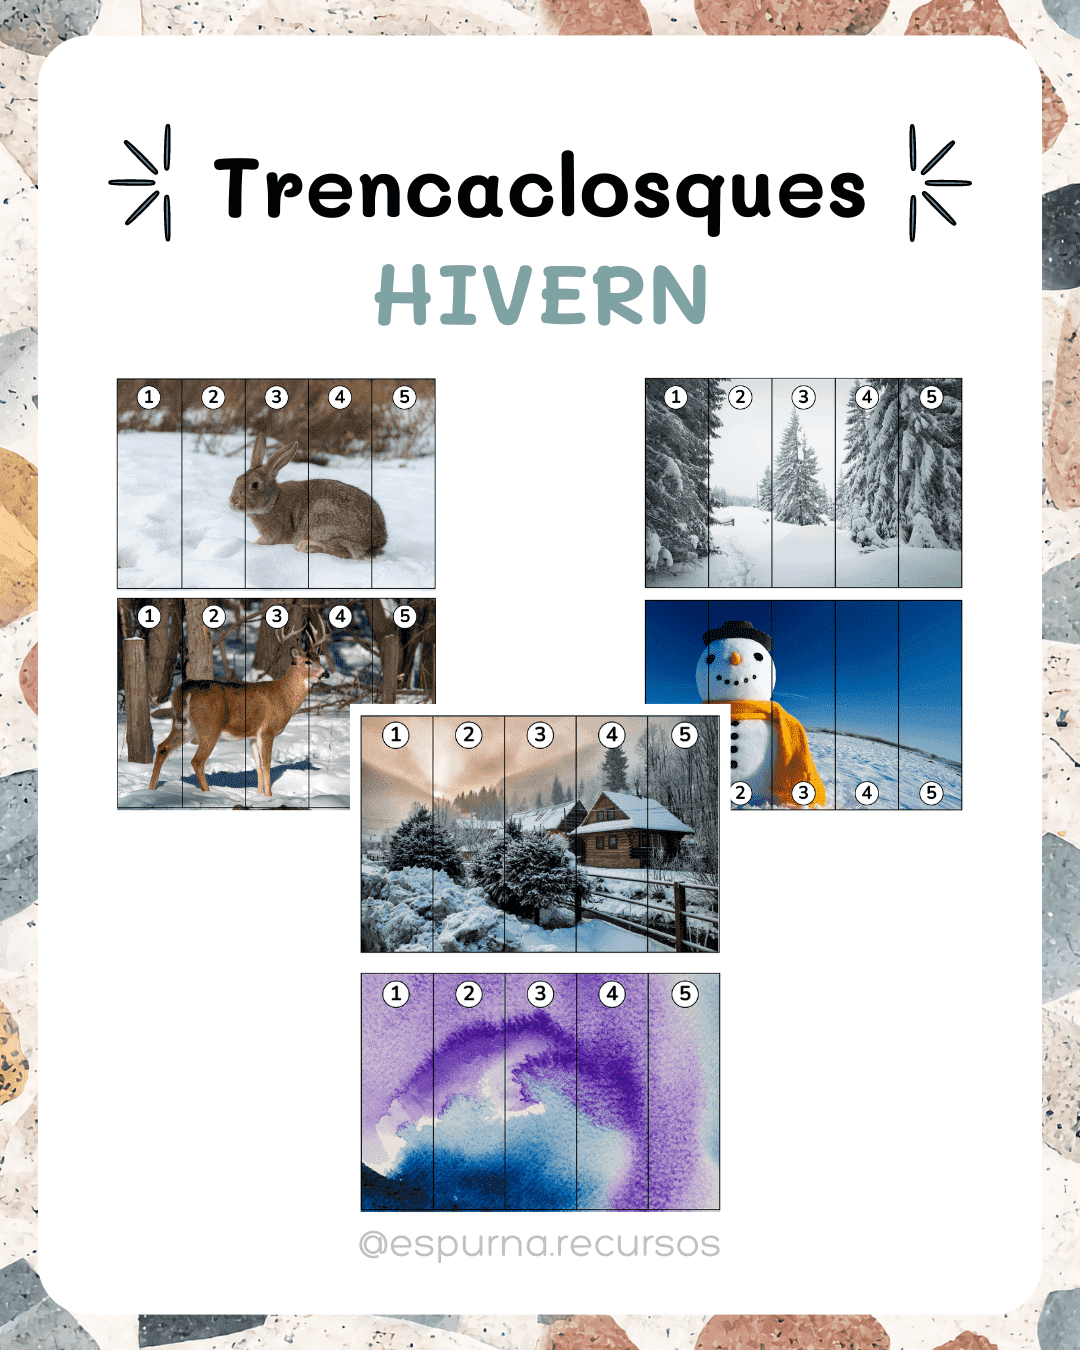 Trencaclosques hivern